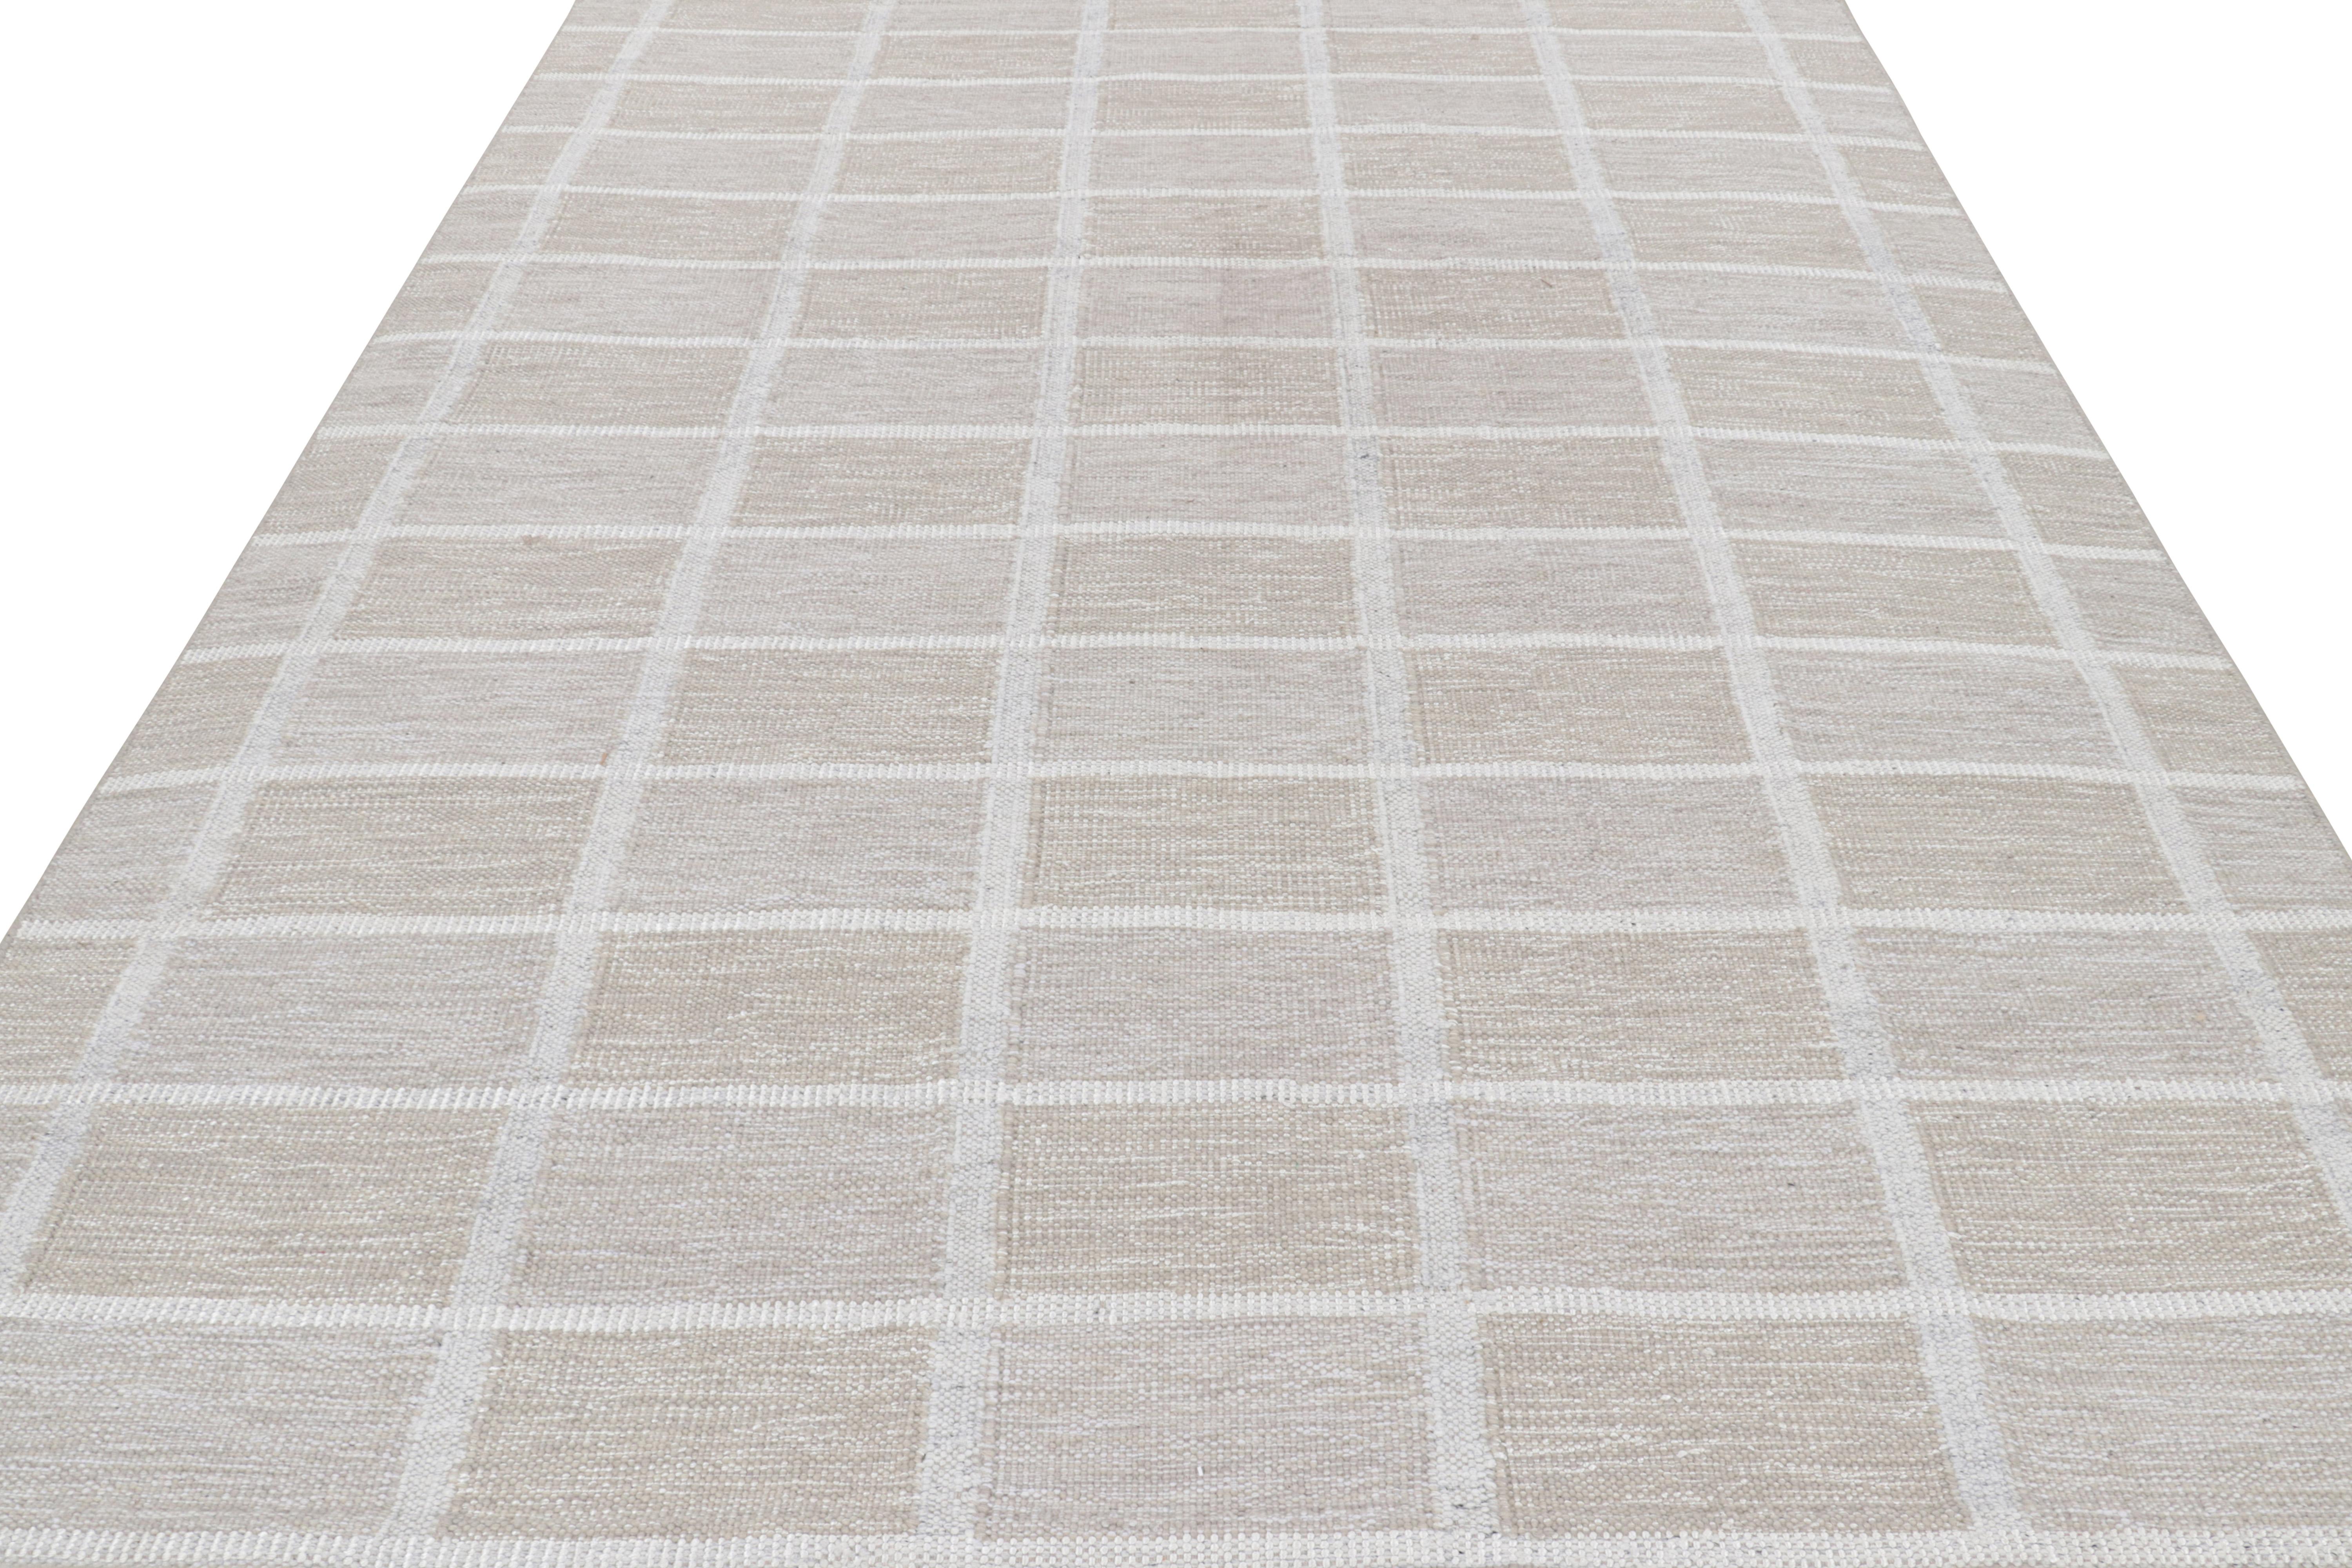 Hand-Woven Rug & Kilim’s Scandinavian Style Rug in Beige with Gray and White Grid Patterns For Sale